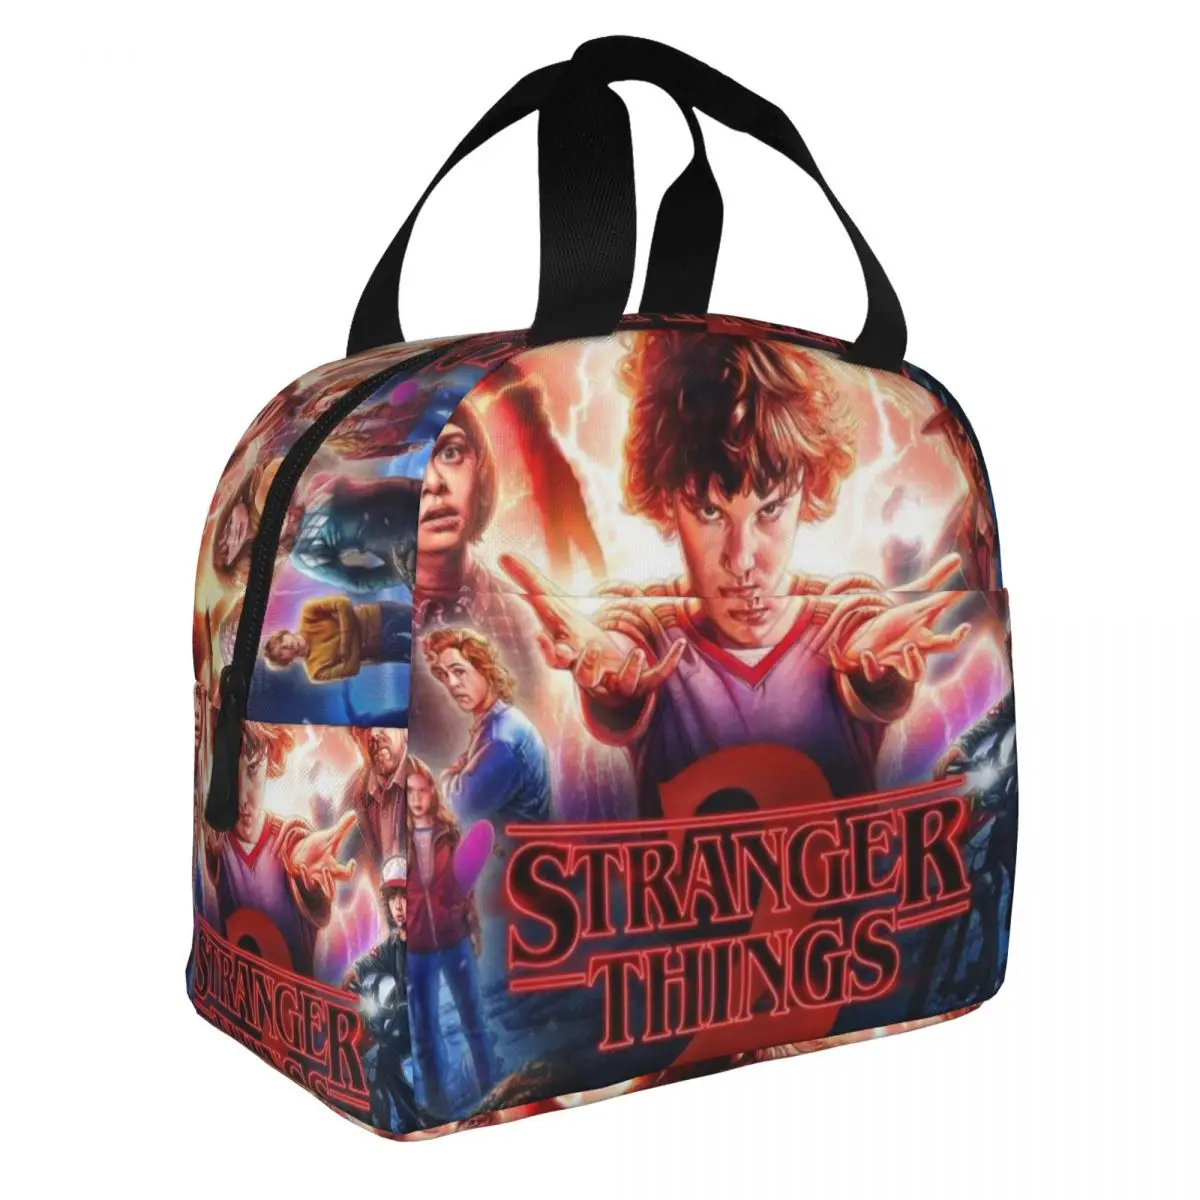 Stranger Things Lunch Bento Bags Portable Aluminum Foil thickened Thermal Cloth Lunch Bag for Women Men Boy